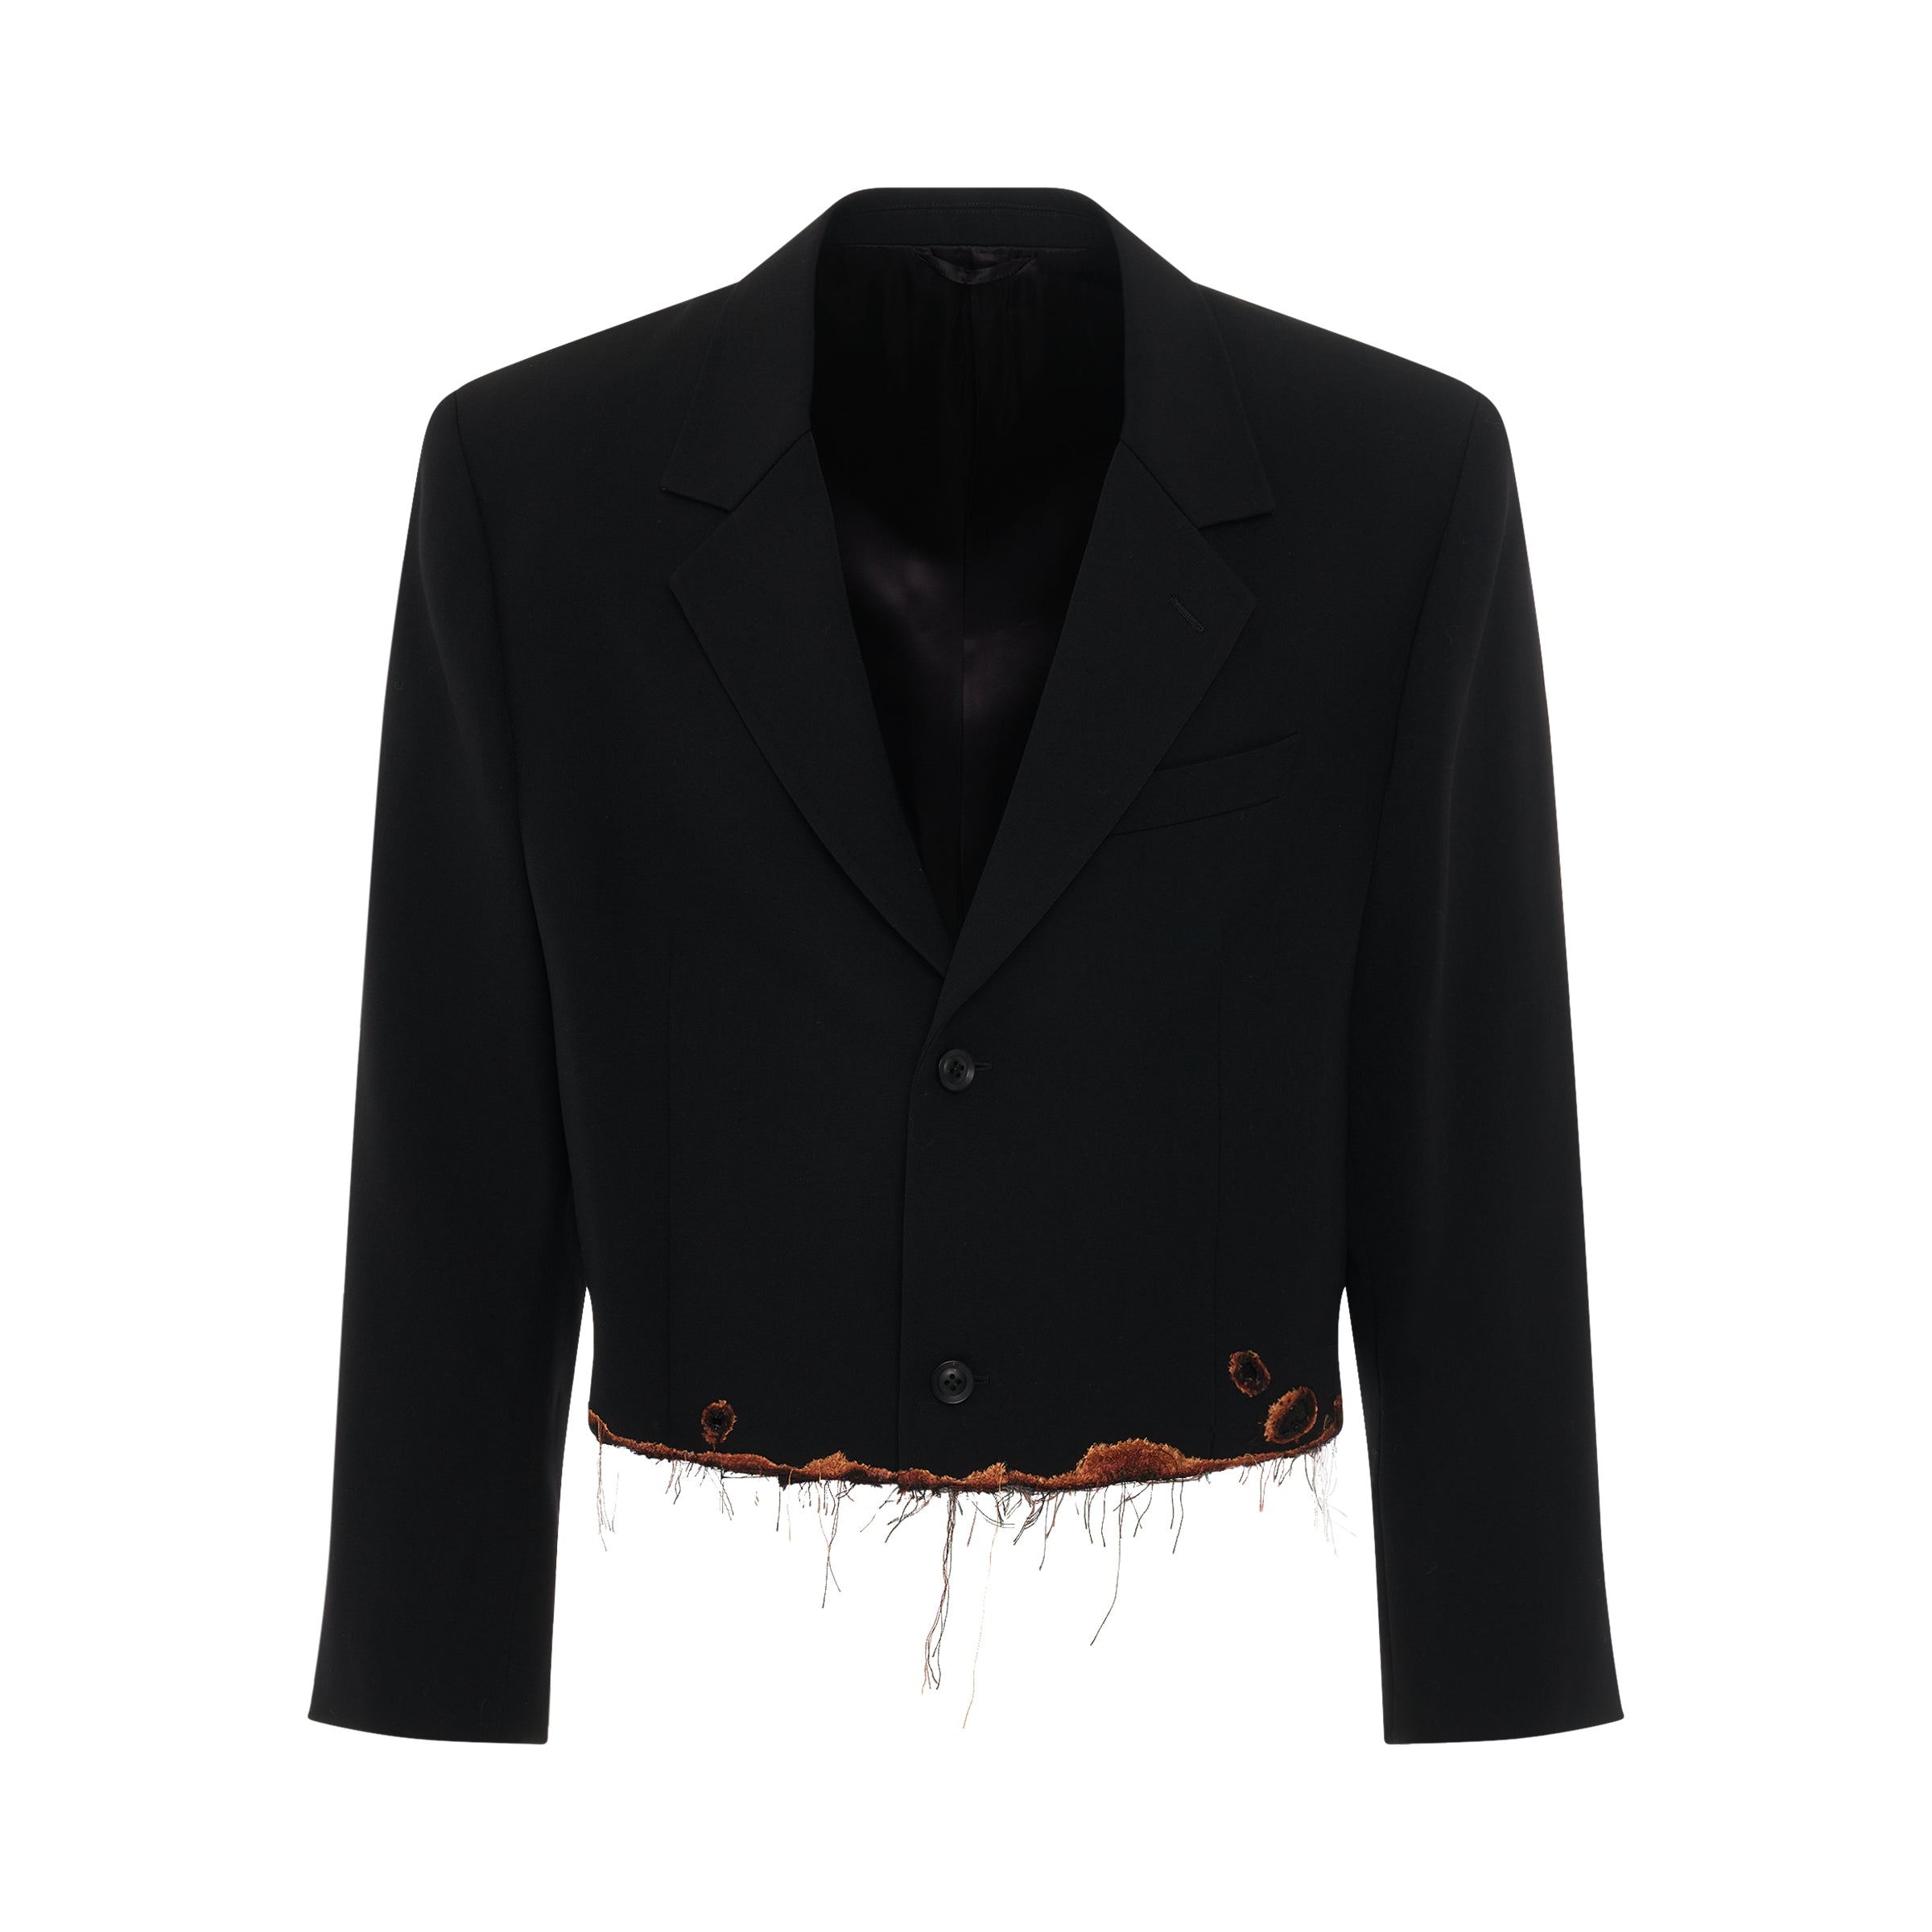 DOUBLET Burning Embroidery Tailored Jacket in Black – MARAIS